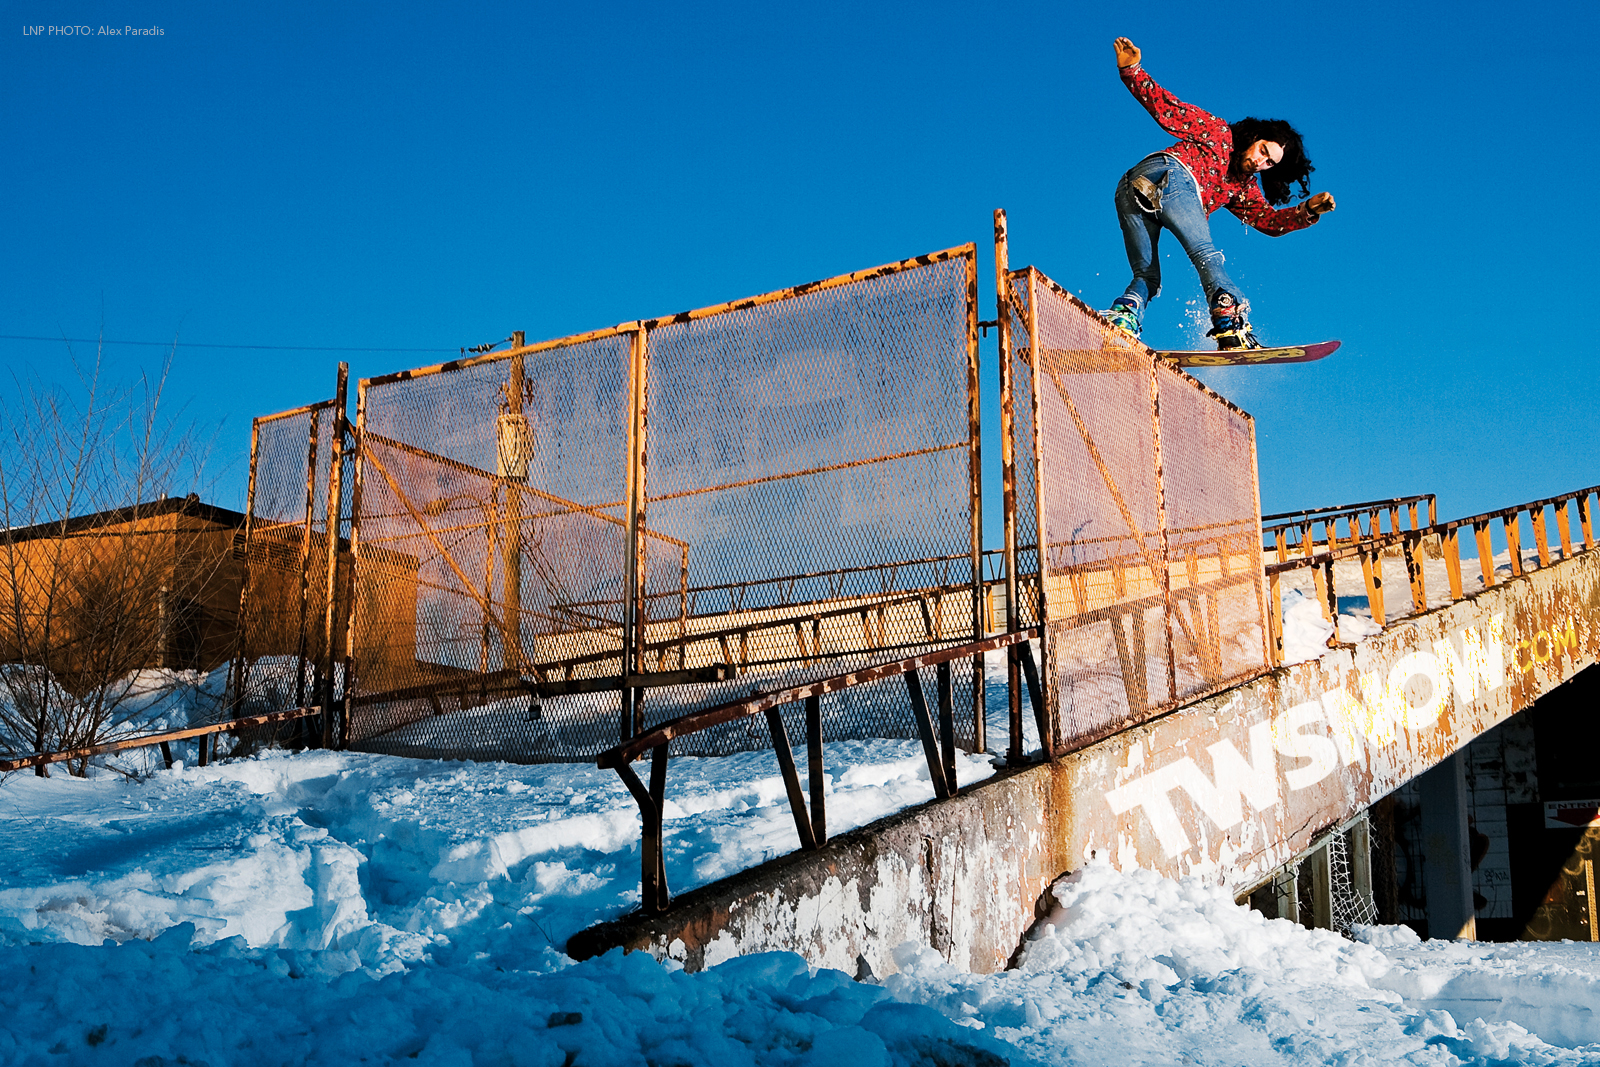 Snowboarding Wallpaper Photos Pictures Wednesday Transworld